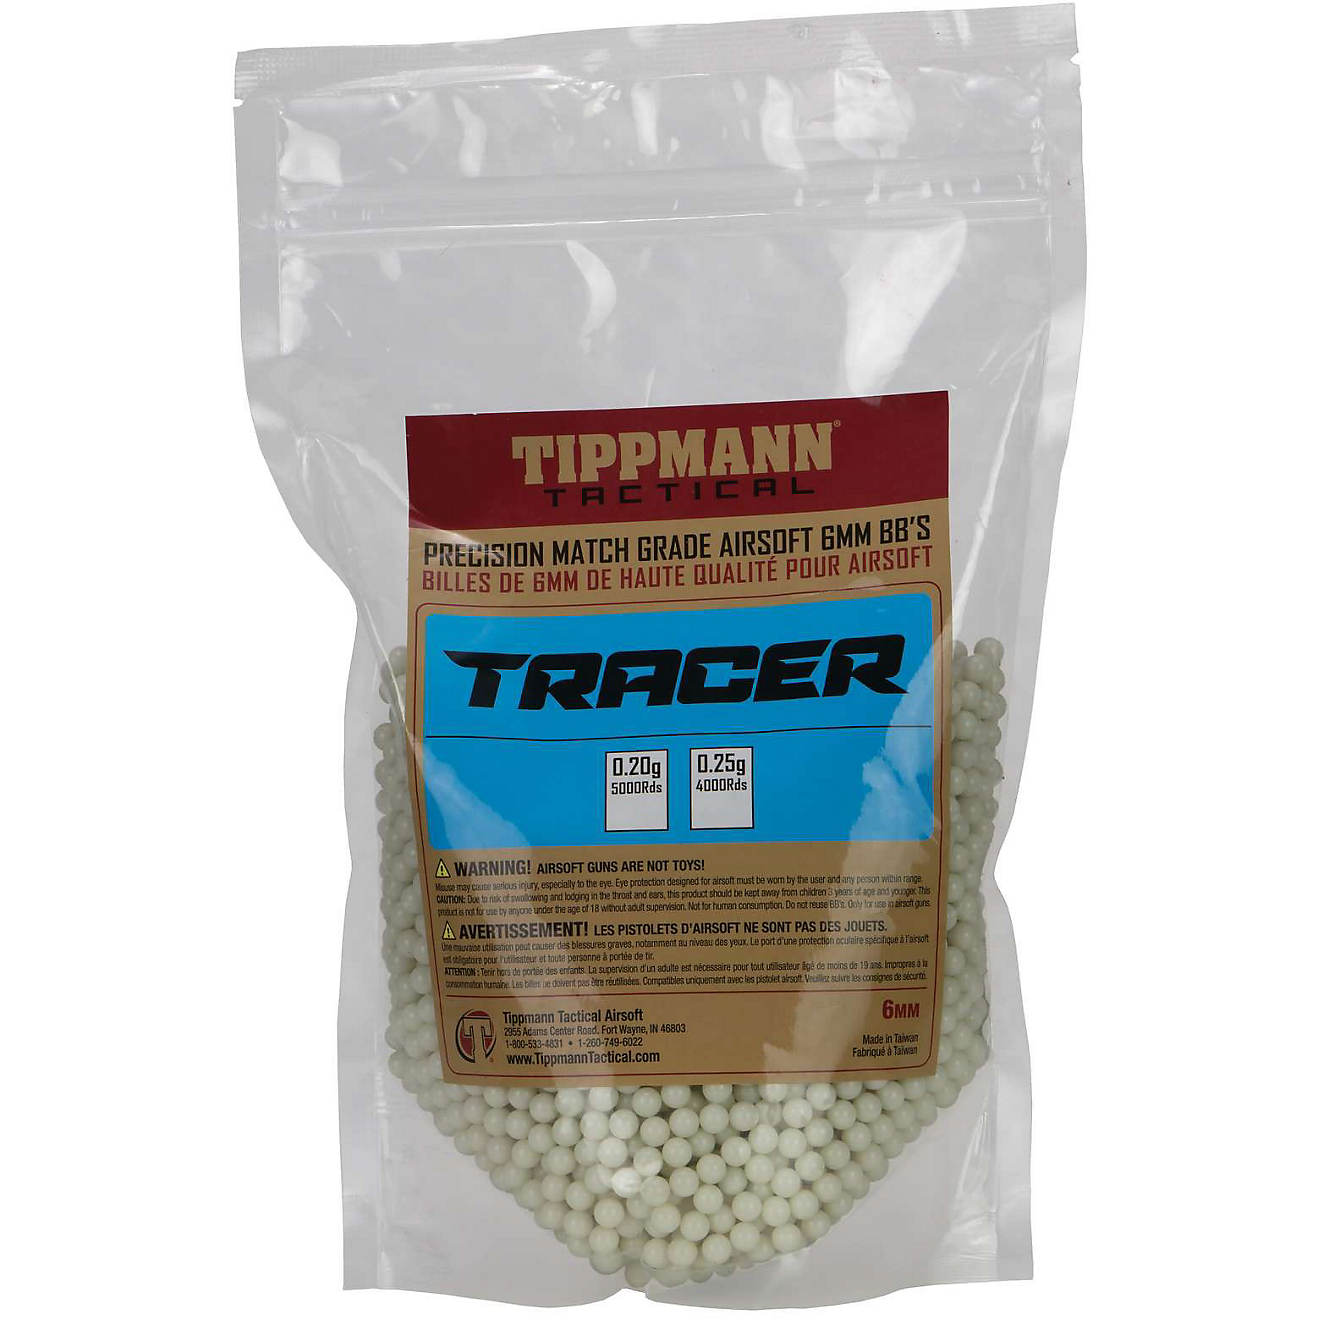 Tippmann Tracer Precision 0.20 gr Airsoft BBs 5,000-Count                                                                        - view number 1